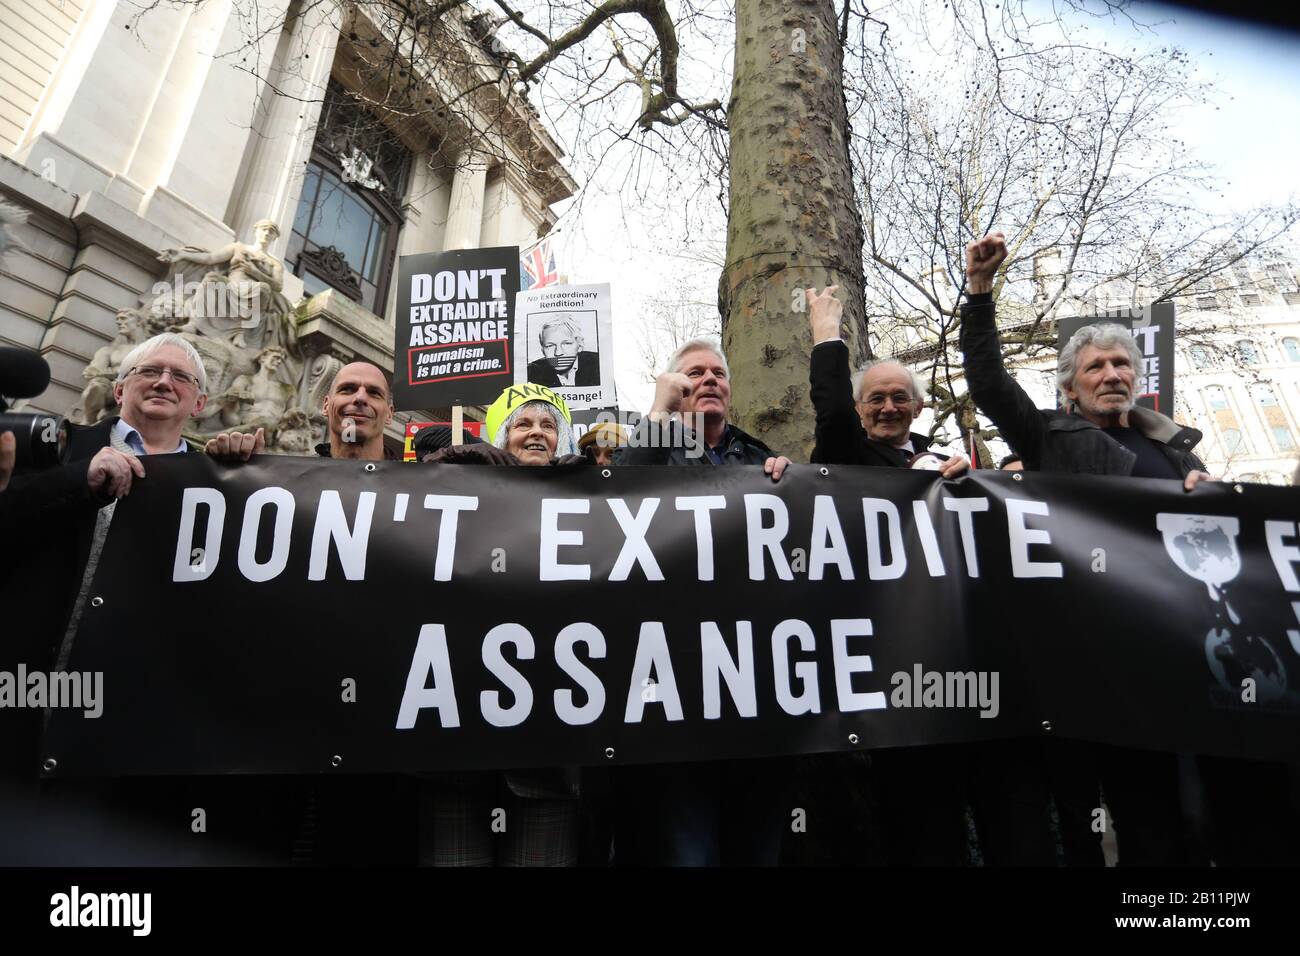 RETRANSMITTING CORRECTING RICHARD ASSANGE TO JOHN SHIPTON CORRECT CAPTION BELOW Supporters of Julian Assange, including Yanis Varoufakis (second left), Vivienne Westwood (centre), Assange's father John Shipton (second right) and Pink Floyd bassist Roger Waters (right), begin a march from Australia House to Parliament Square in London, protesting Assange's imprisonment and extradition. Stock Photo